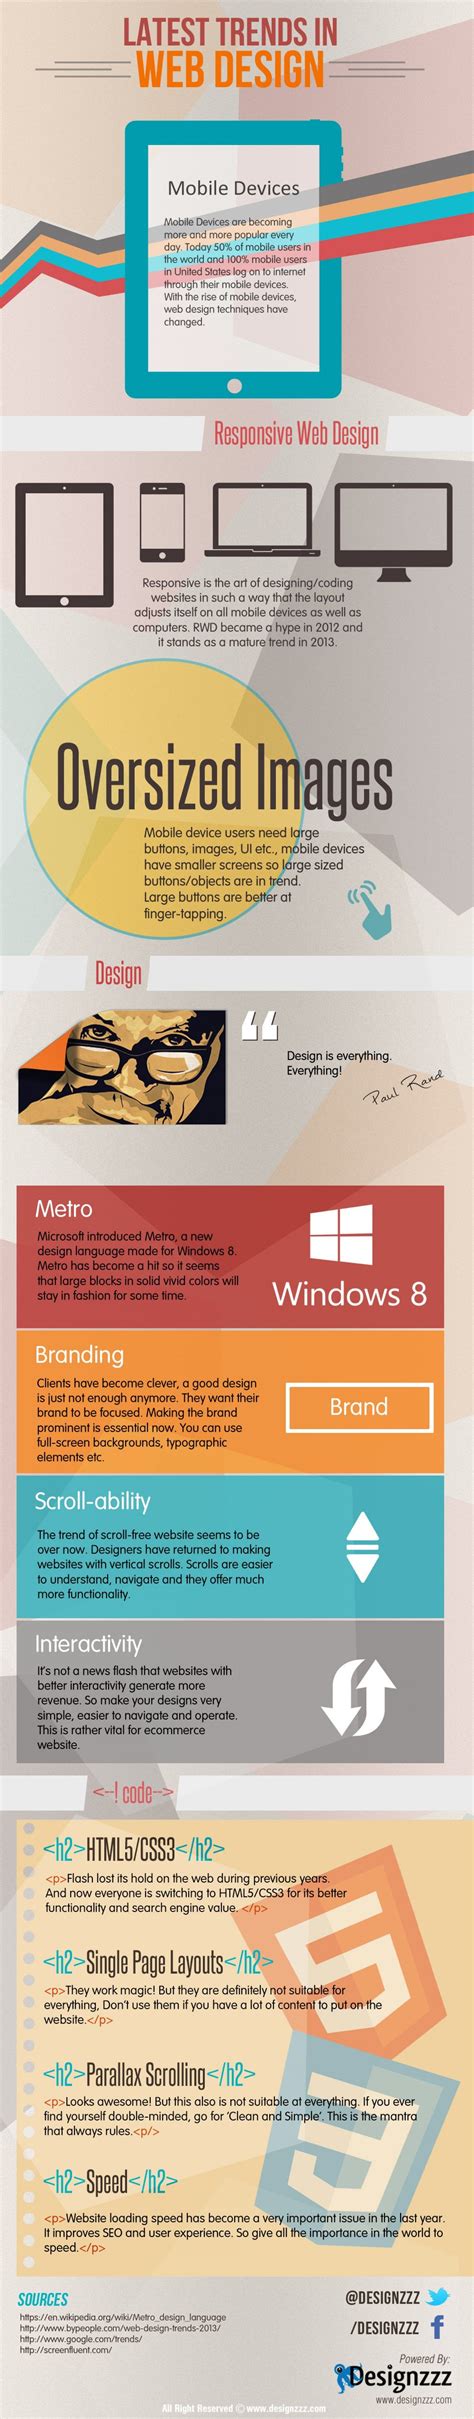 latest-trends-in-web-design-visual-ly-web-design-trends,-latest-web